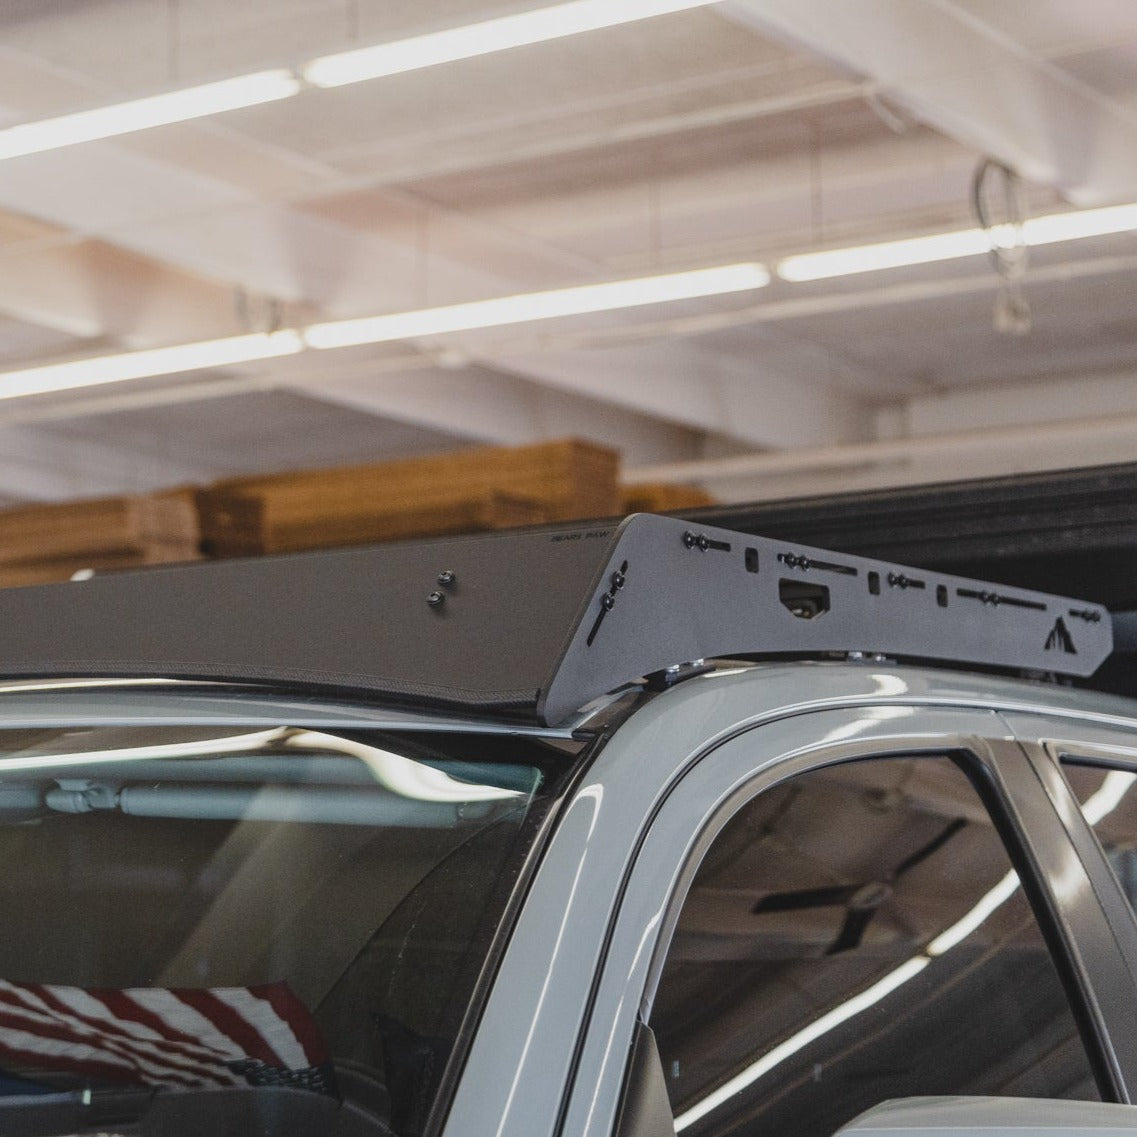 The Bear Paw Camper Roof Rack Tundra (2007-2021)